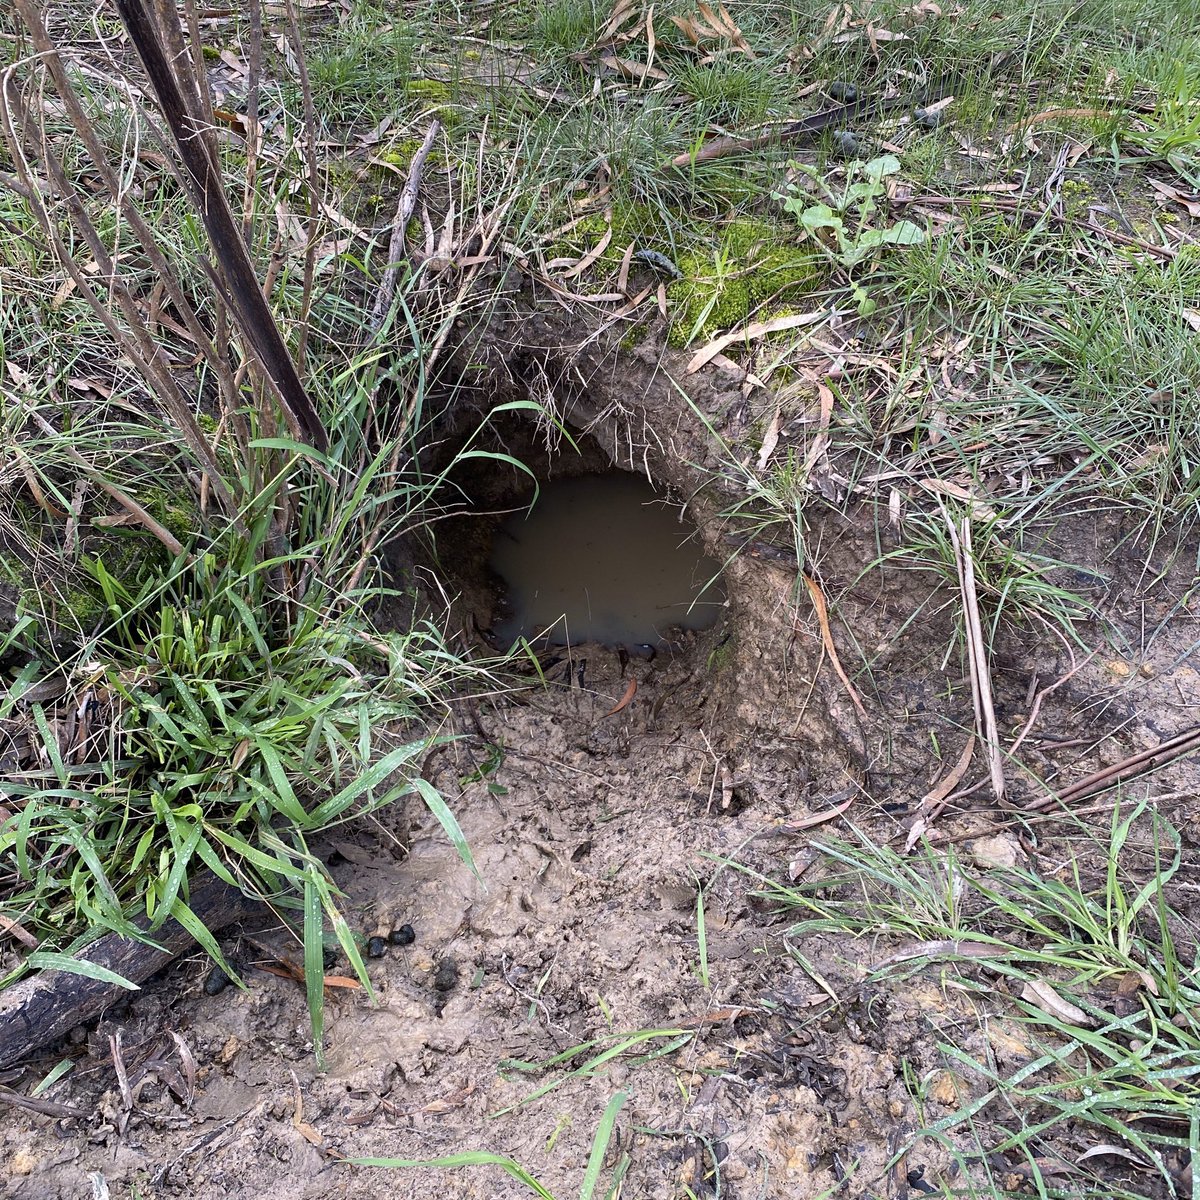 Another wombat burrow. Wombats are very good at digging holes but they’re also very good at getting their holes flooded. Silly woms.